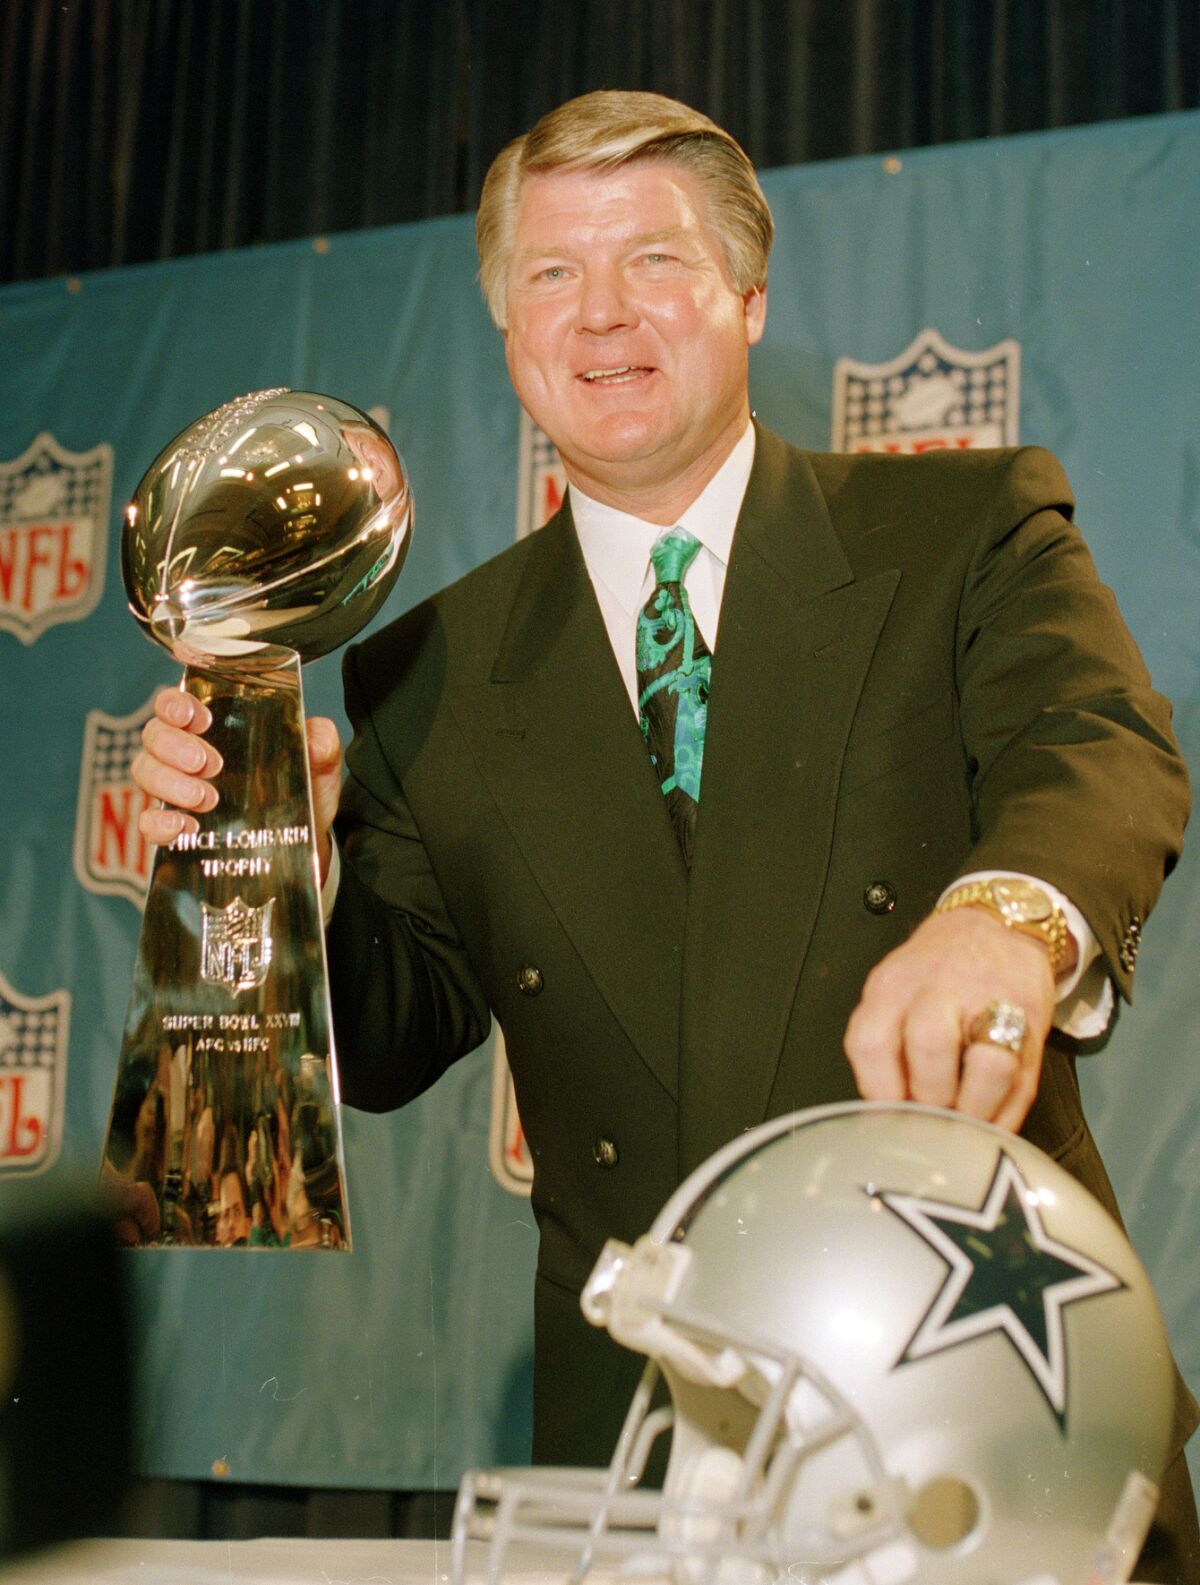 FILE - In this Jan. 28, 1994, file photo, Dallas Cowboys head coach Jimmy Johnson poses with the Vince Lombardi Super Bowl trophy during an NFL football news conference in Atlanta. Five Super Bowl-winning coaches, including Johnson, and such NFL champion players as Roger Craig, Drew Pearson and Donnie Shell are among the finalists for the Pro Football Hall of Fame's special centennial class announced Thursday, Dec. 19, 2019. A 25-member panel of pro football experts is charged with selecting 10 senior players, two coaches and three contributors who will be inducted into the Canton, Ohio shrine next year as part of the league's celebration of its 100th season. (AP Photo/Ron Heflin, File)